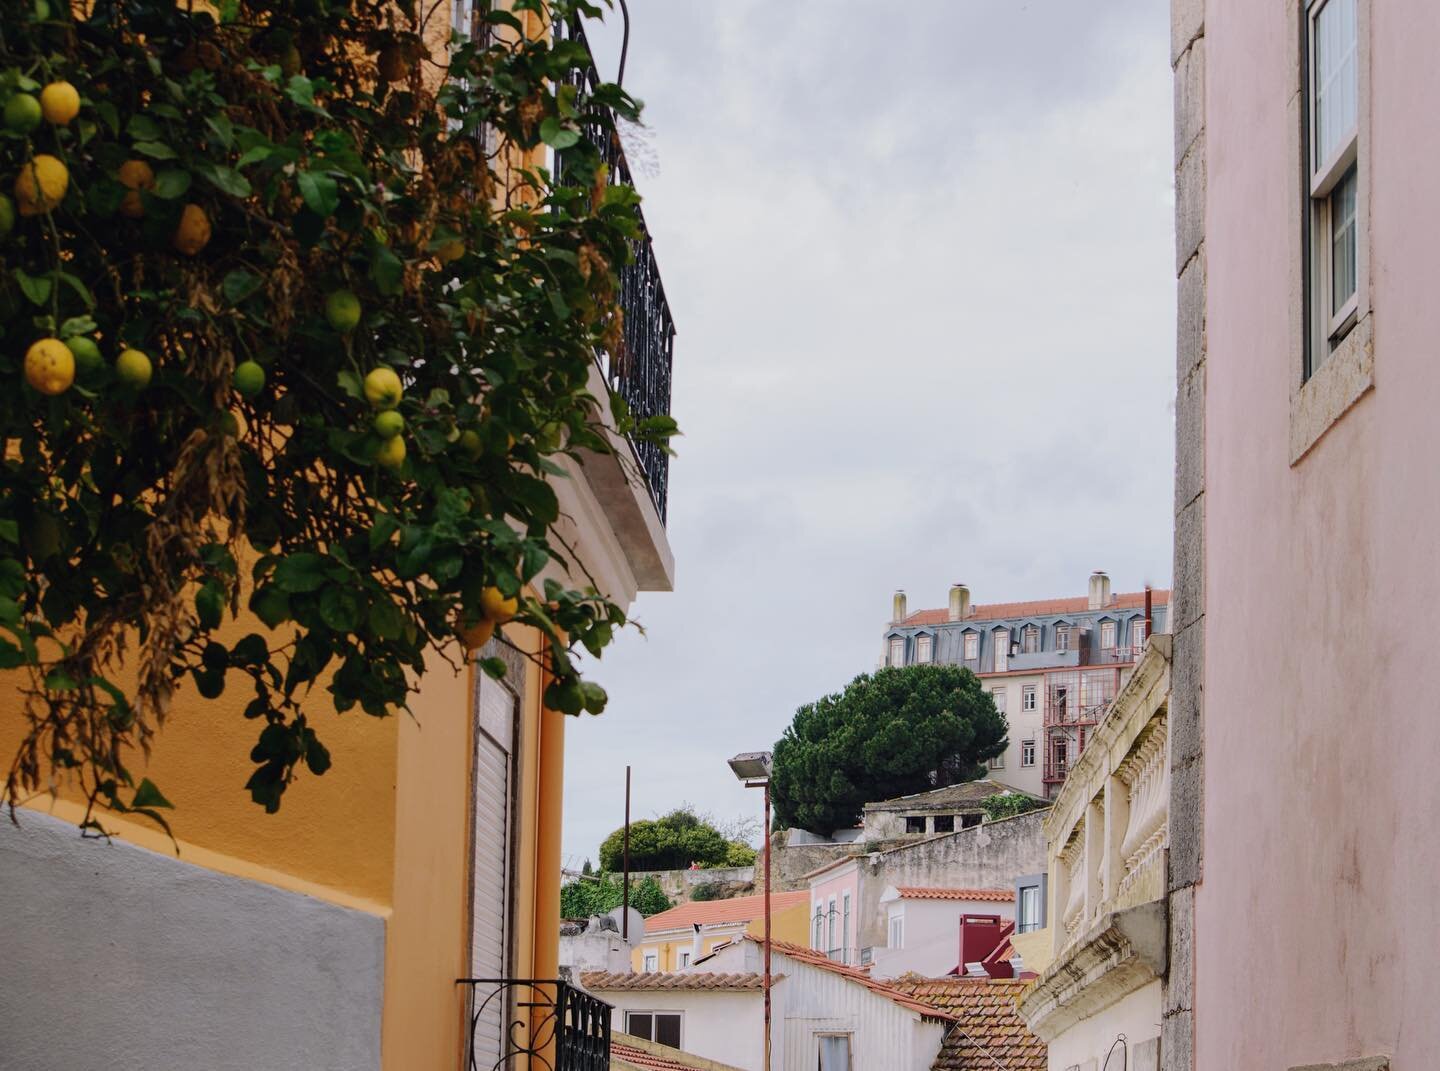 Lisbon in layers 💛💛💛

If you&rsquo;re visiting Lisbon I highly recommend spending at least a day wandering through the old district of Alfama. There&rsquo;s so much to discover down every alley.

And if you are there wandering these streets on a T